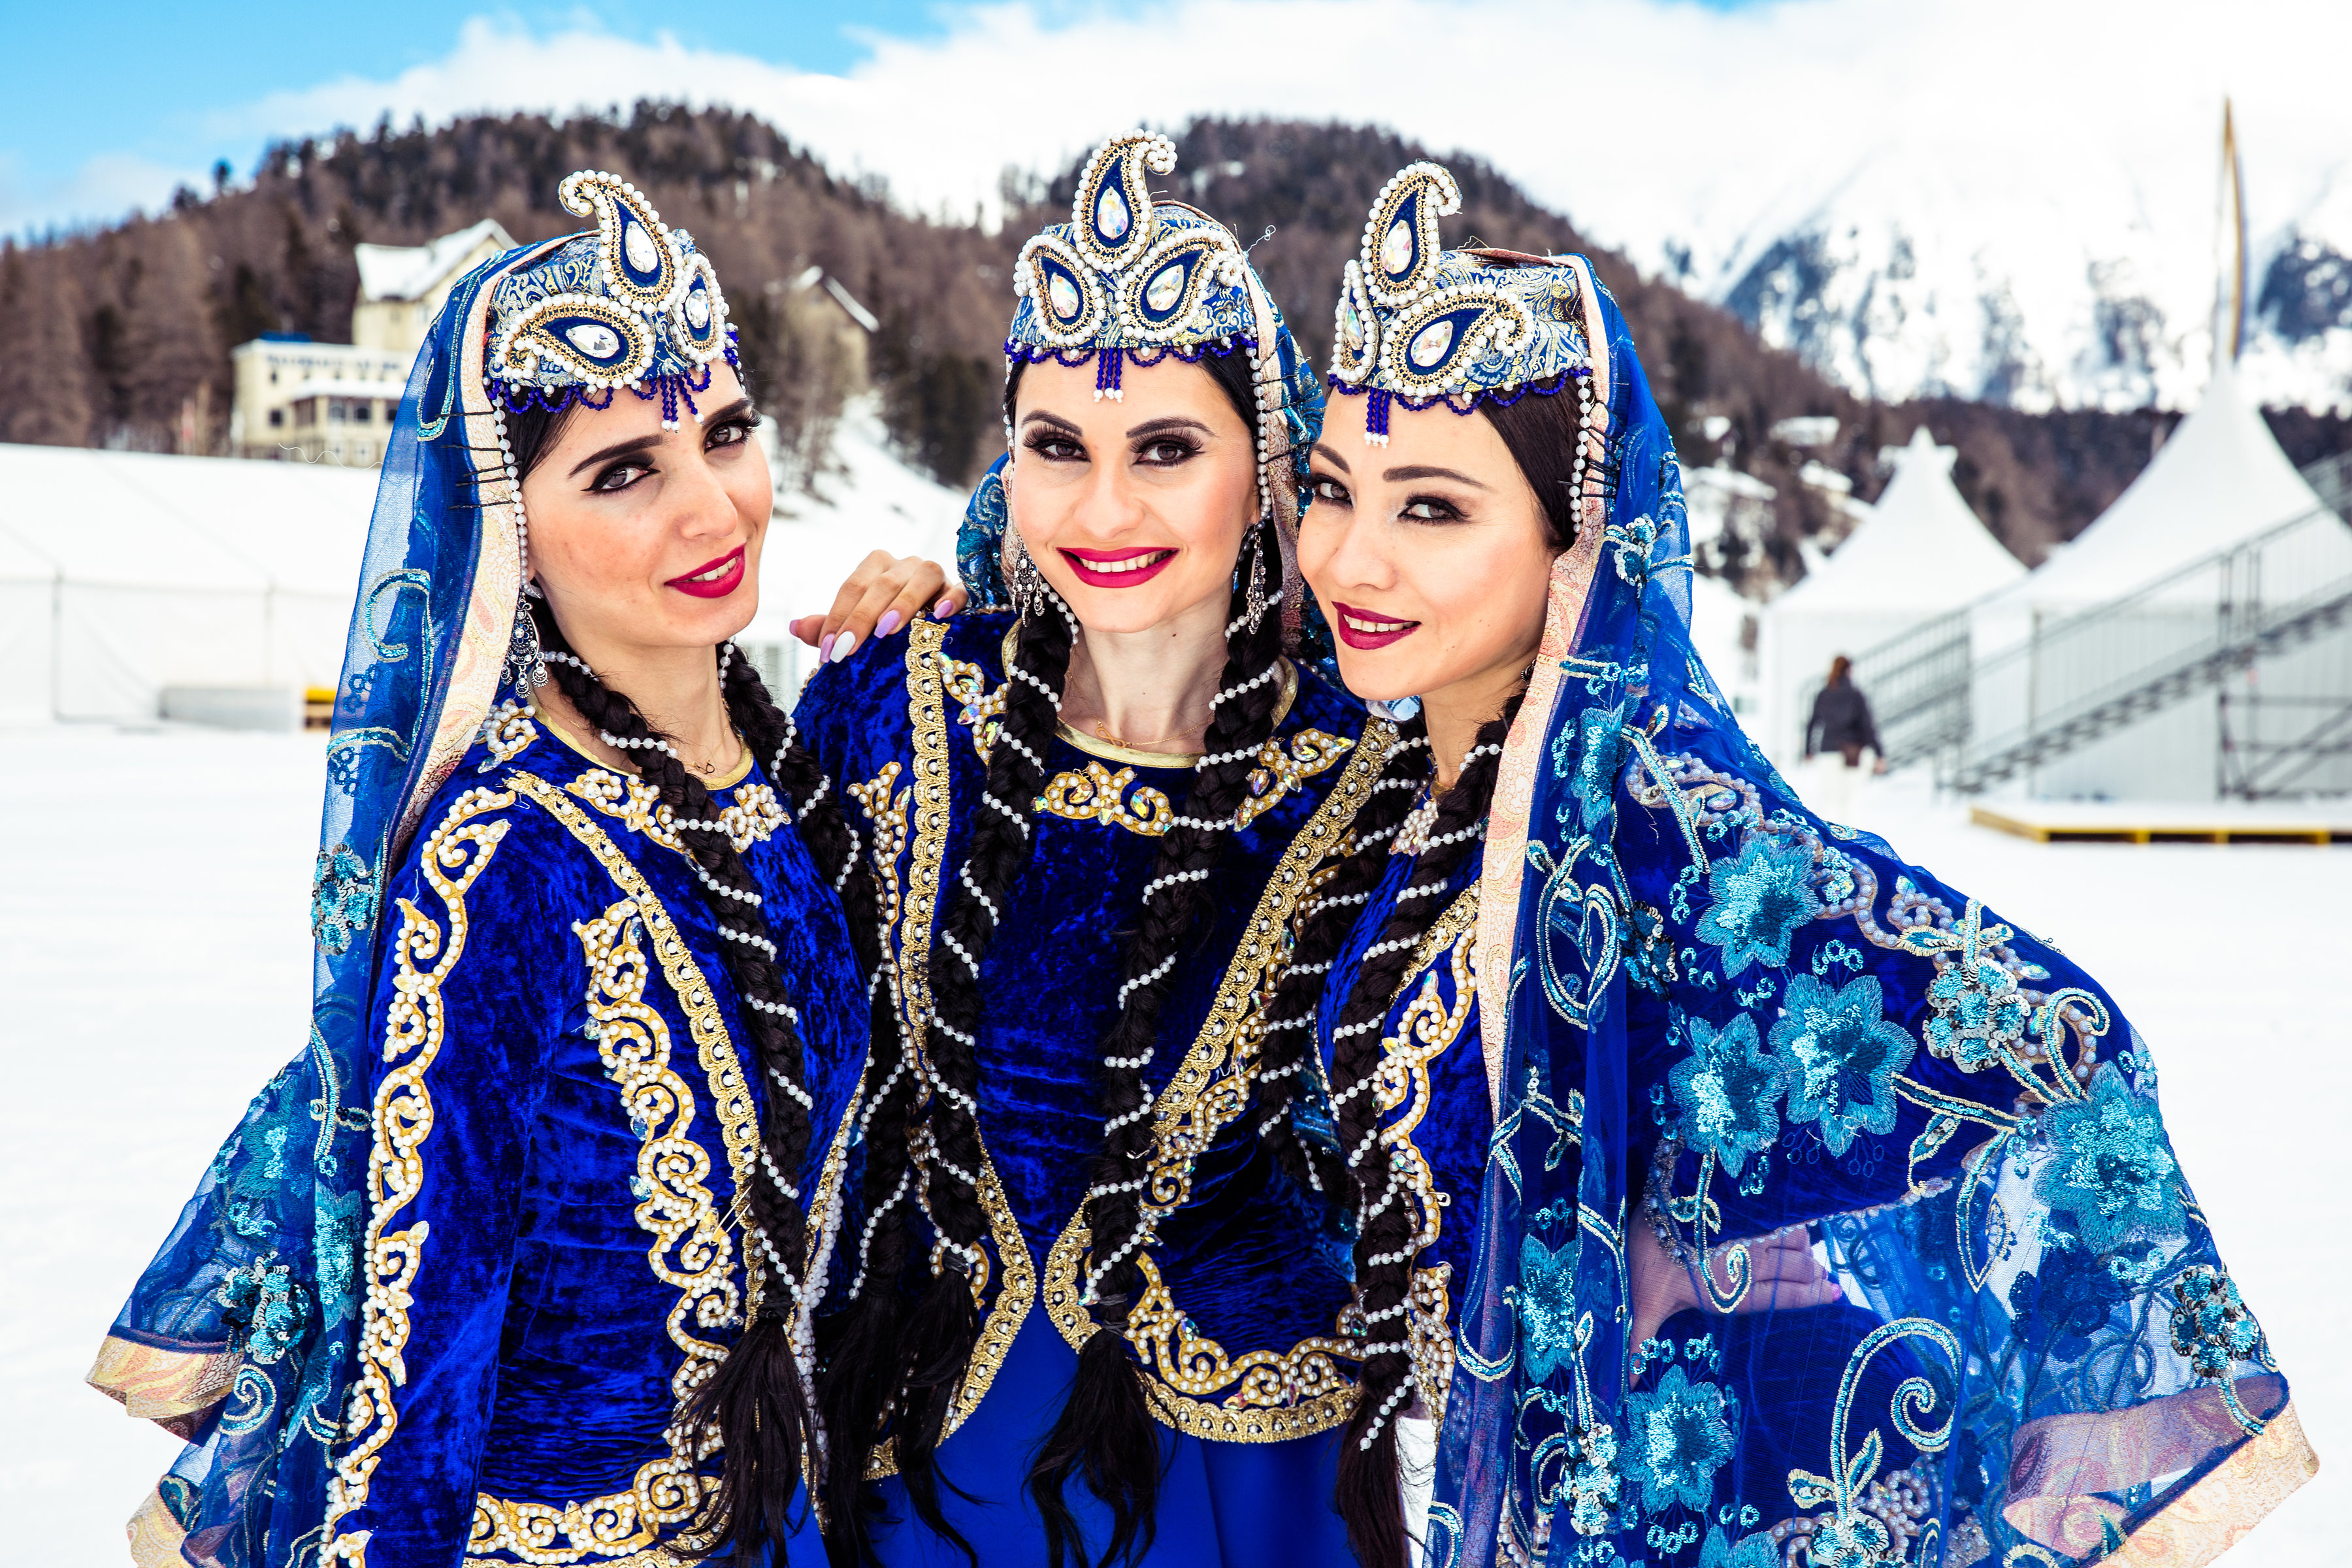 Support from home from Azerbaijani Corner at Snow Polo 2018